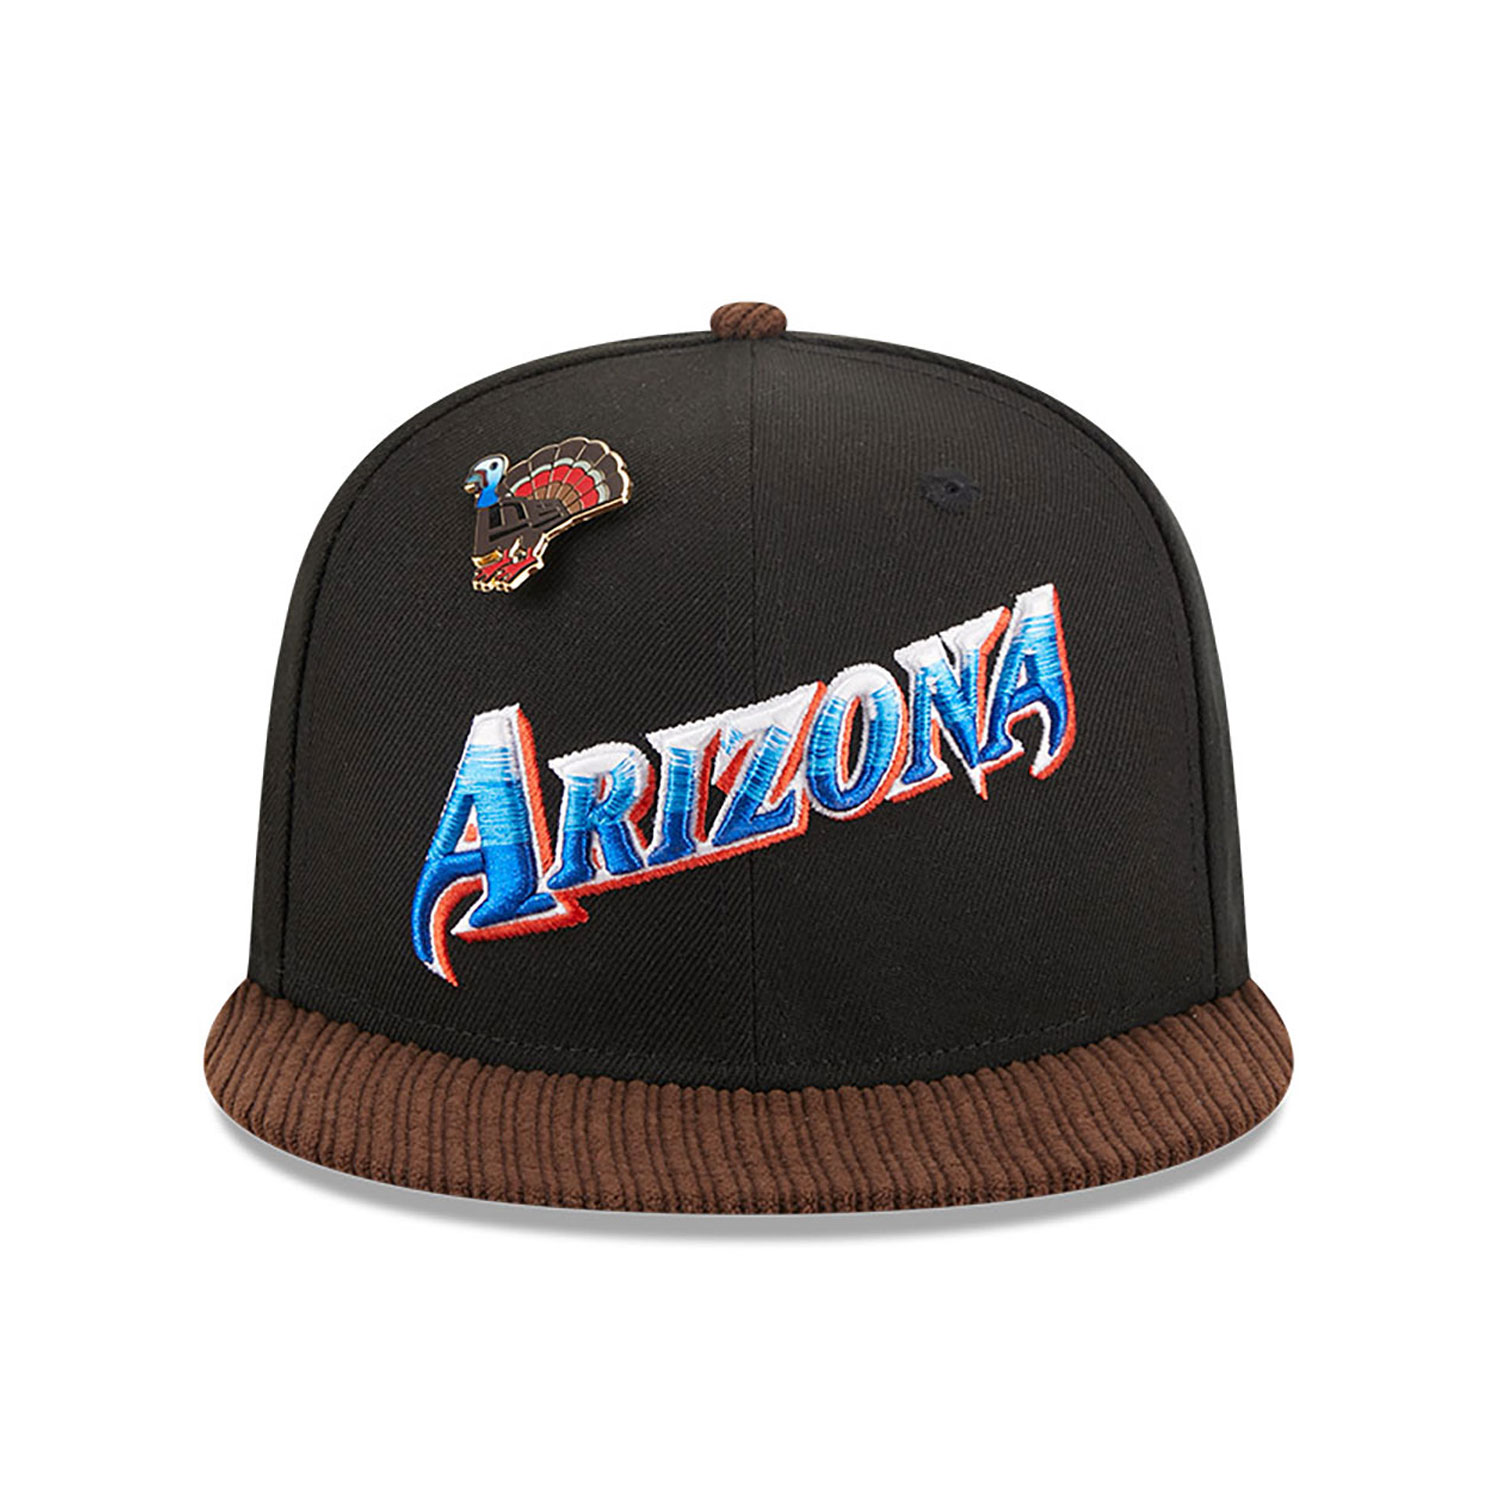 Arizona Diamondbacks MLB Cooperstown Feathered Cord Black 59FIFTY Fitted Cap